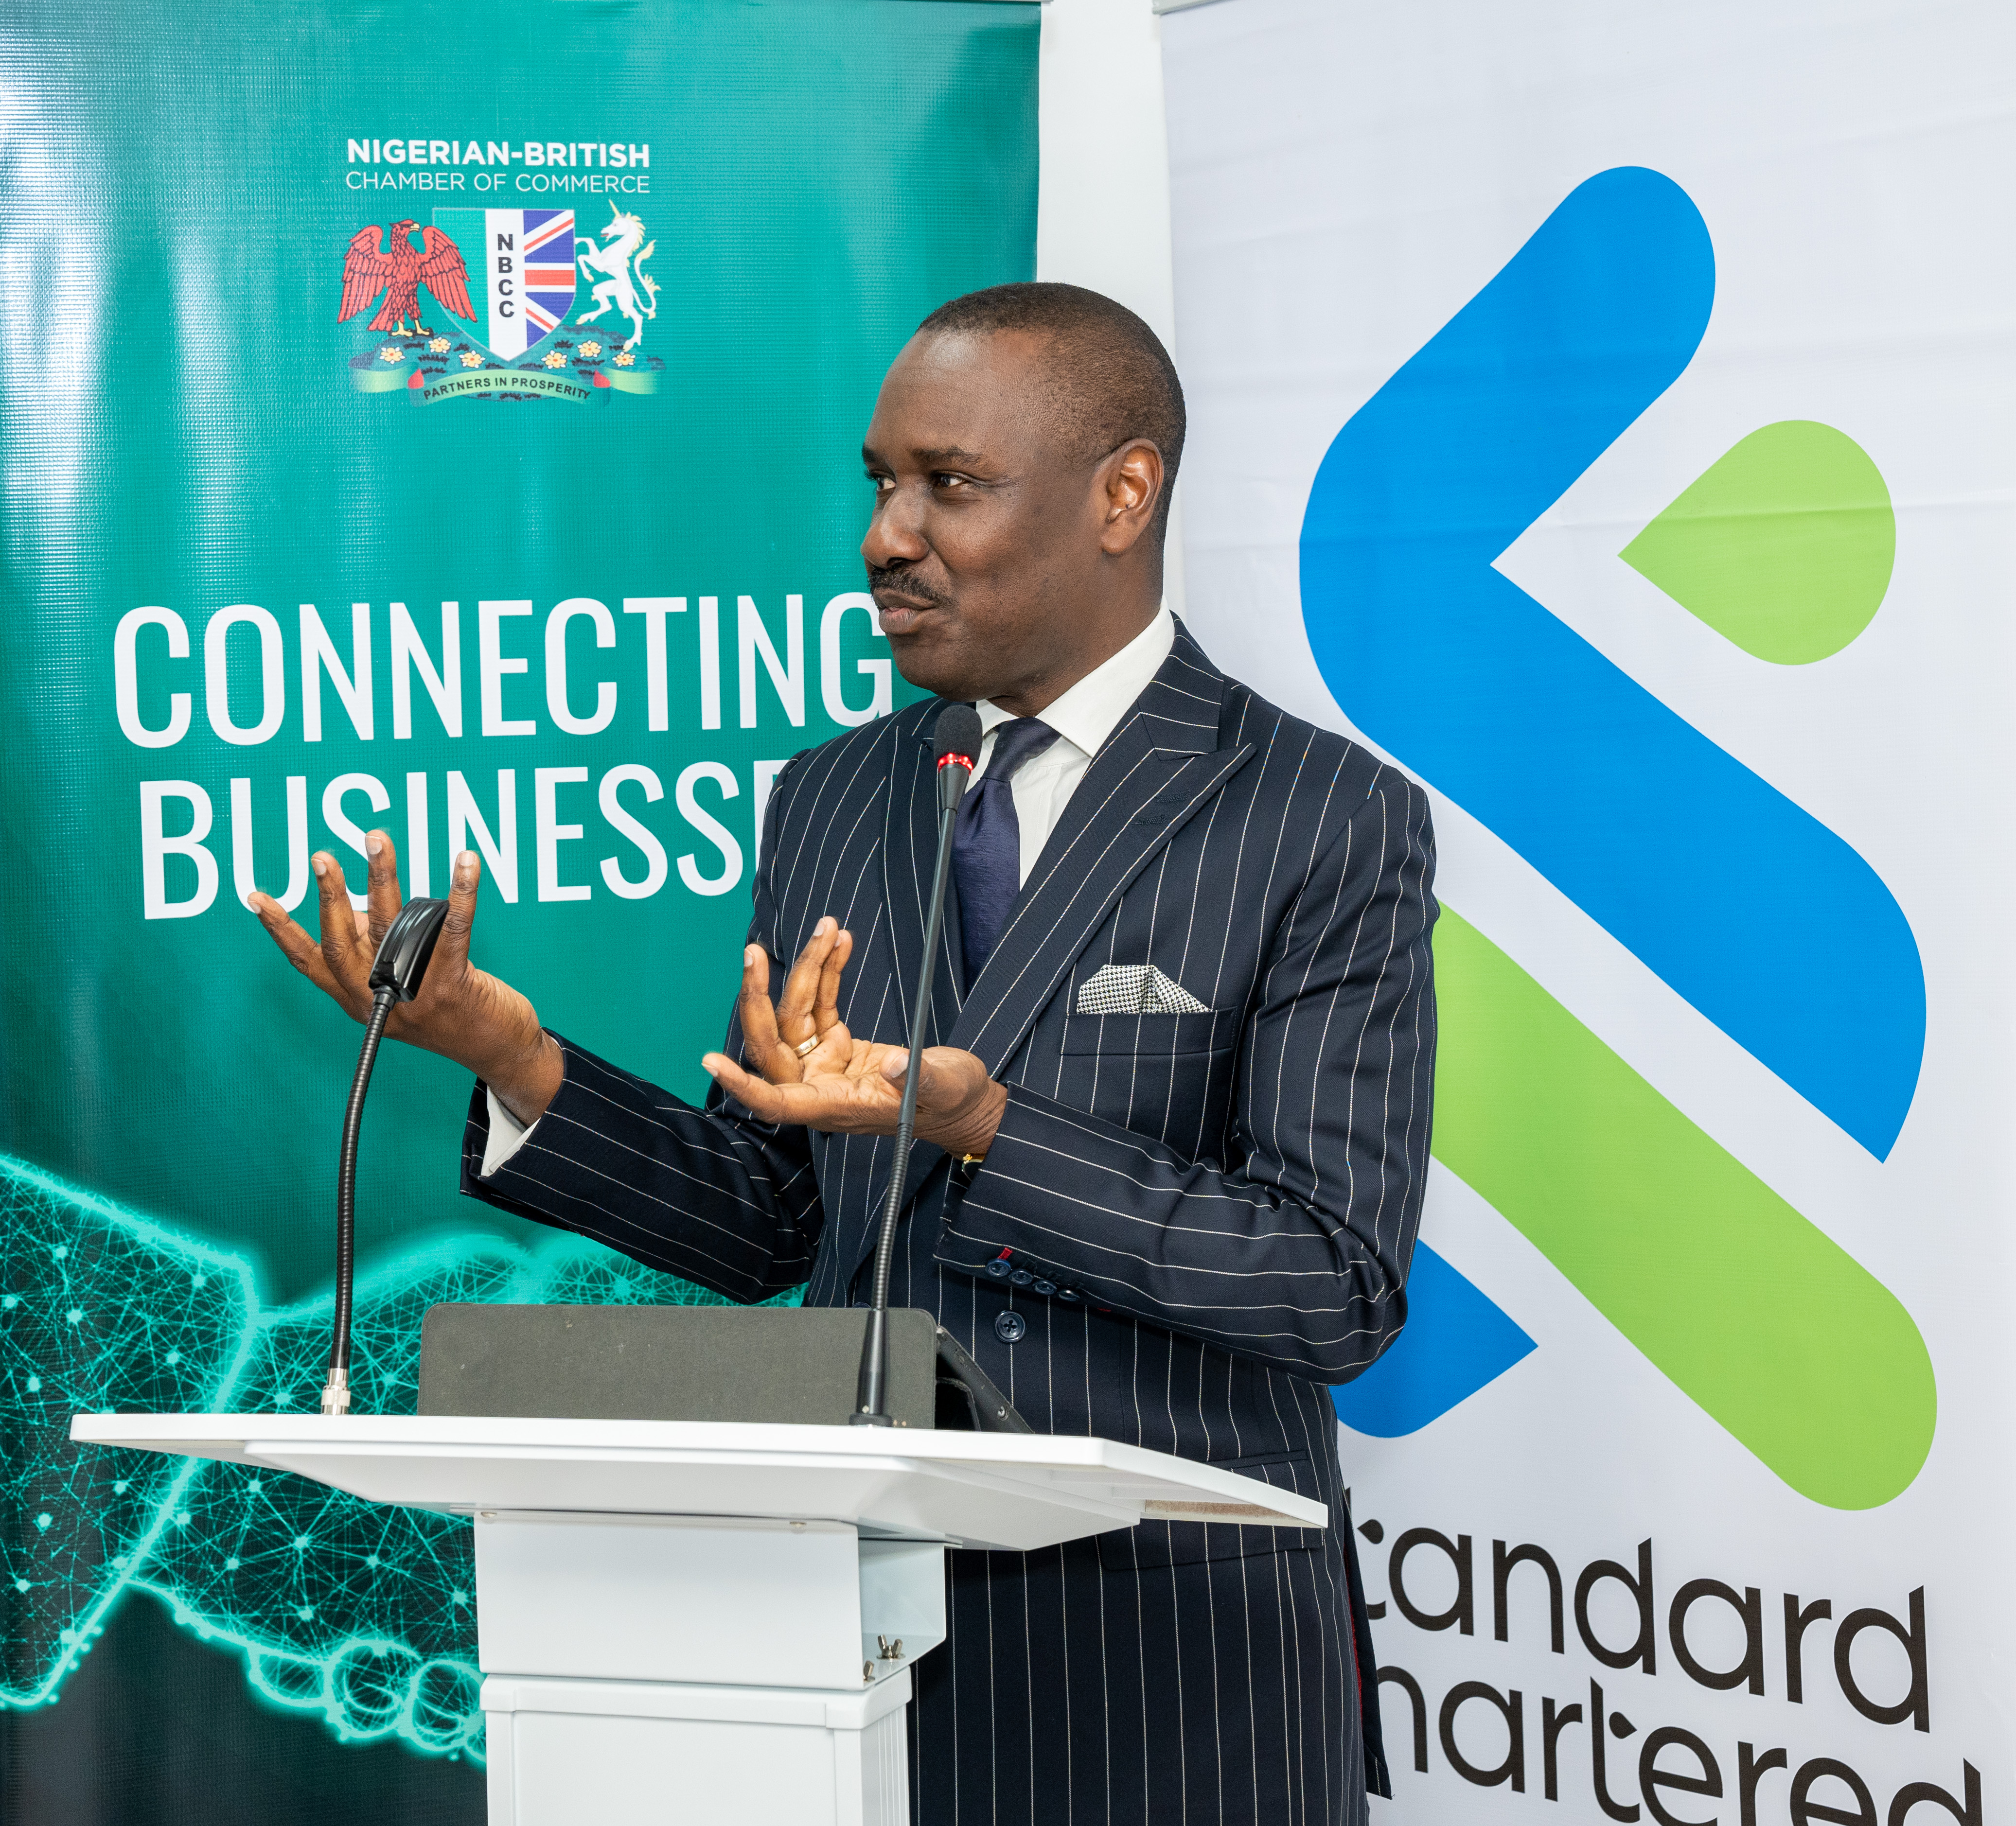 STANDARD CHARTERED TRAINING ROOM LAUNCH 2022